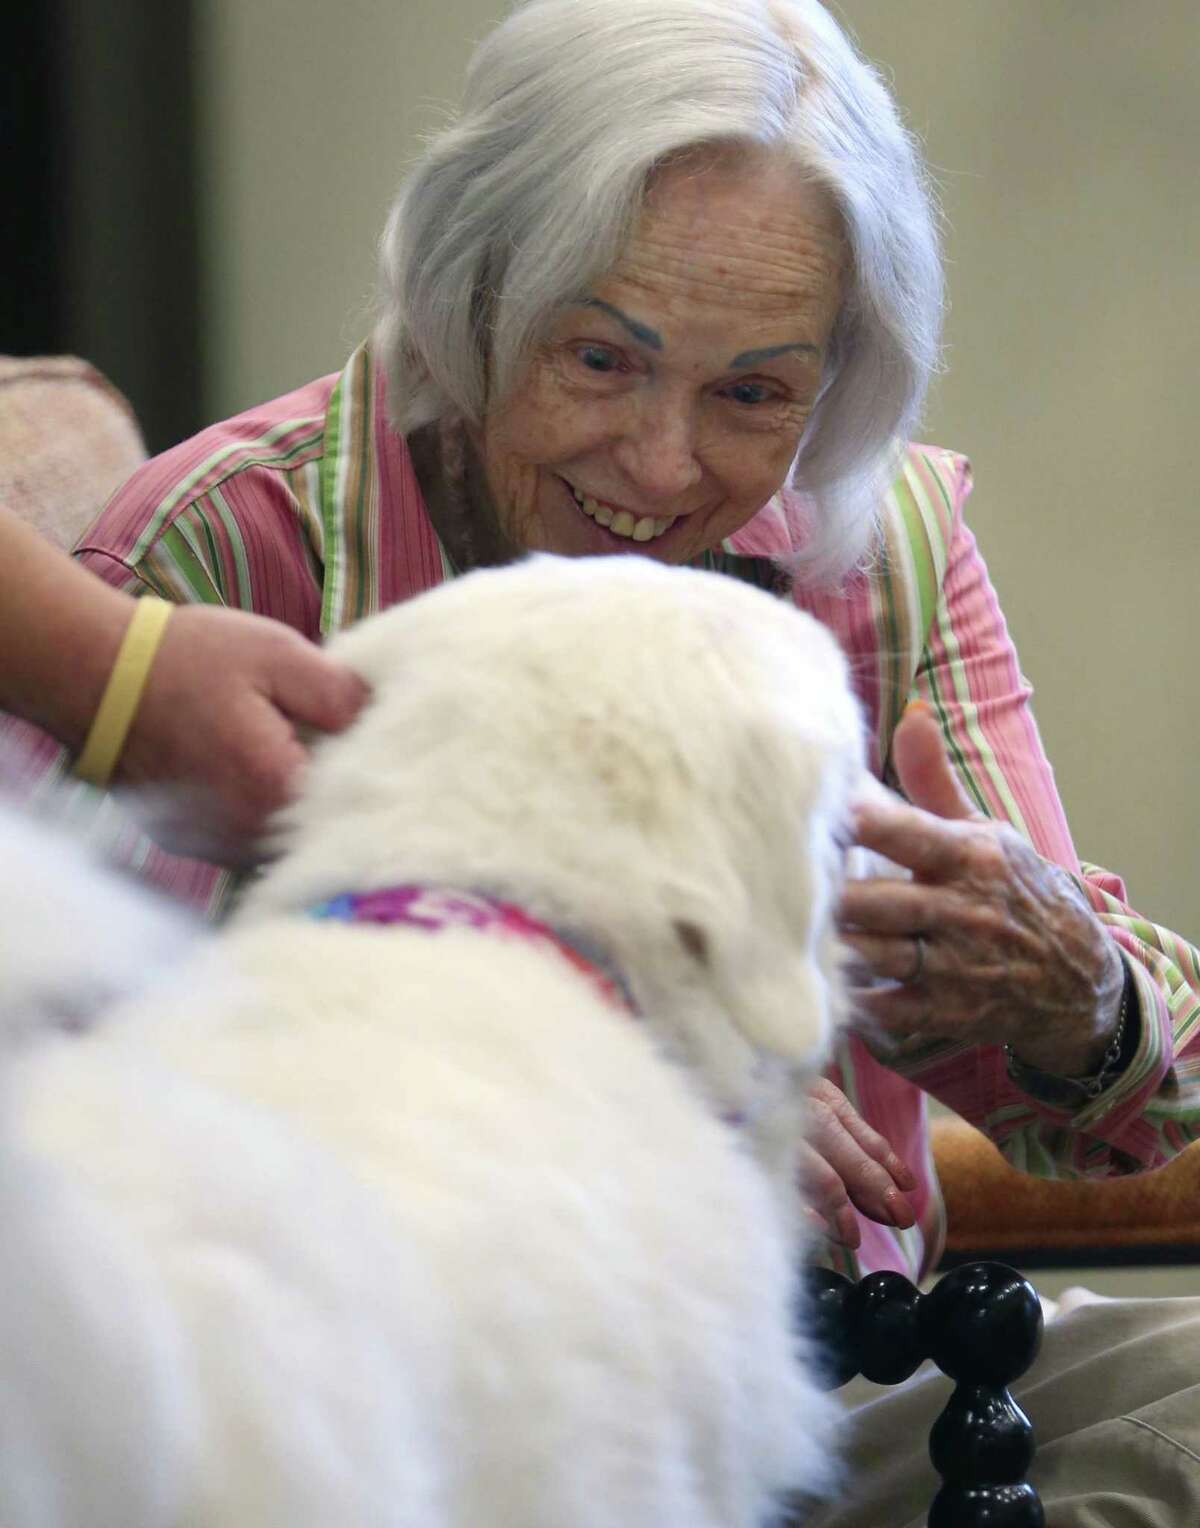 Mary Richter, pets Doc, a Great Pyrenees dog that helps provide companionship to residents in a San Antonio-area Franklin Park Memory Care facility, Wednesday, Feb. 21, 2018. Three San Antonio-area Franklin Park facilities use rescued Great Pyrenees dogs to improve the quality of life for their facilities' residents.